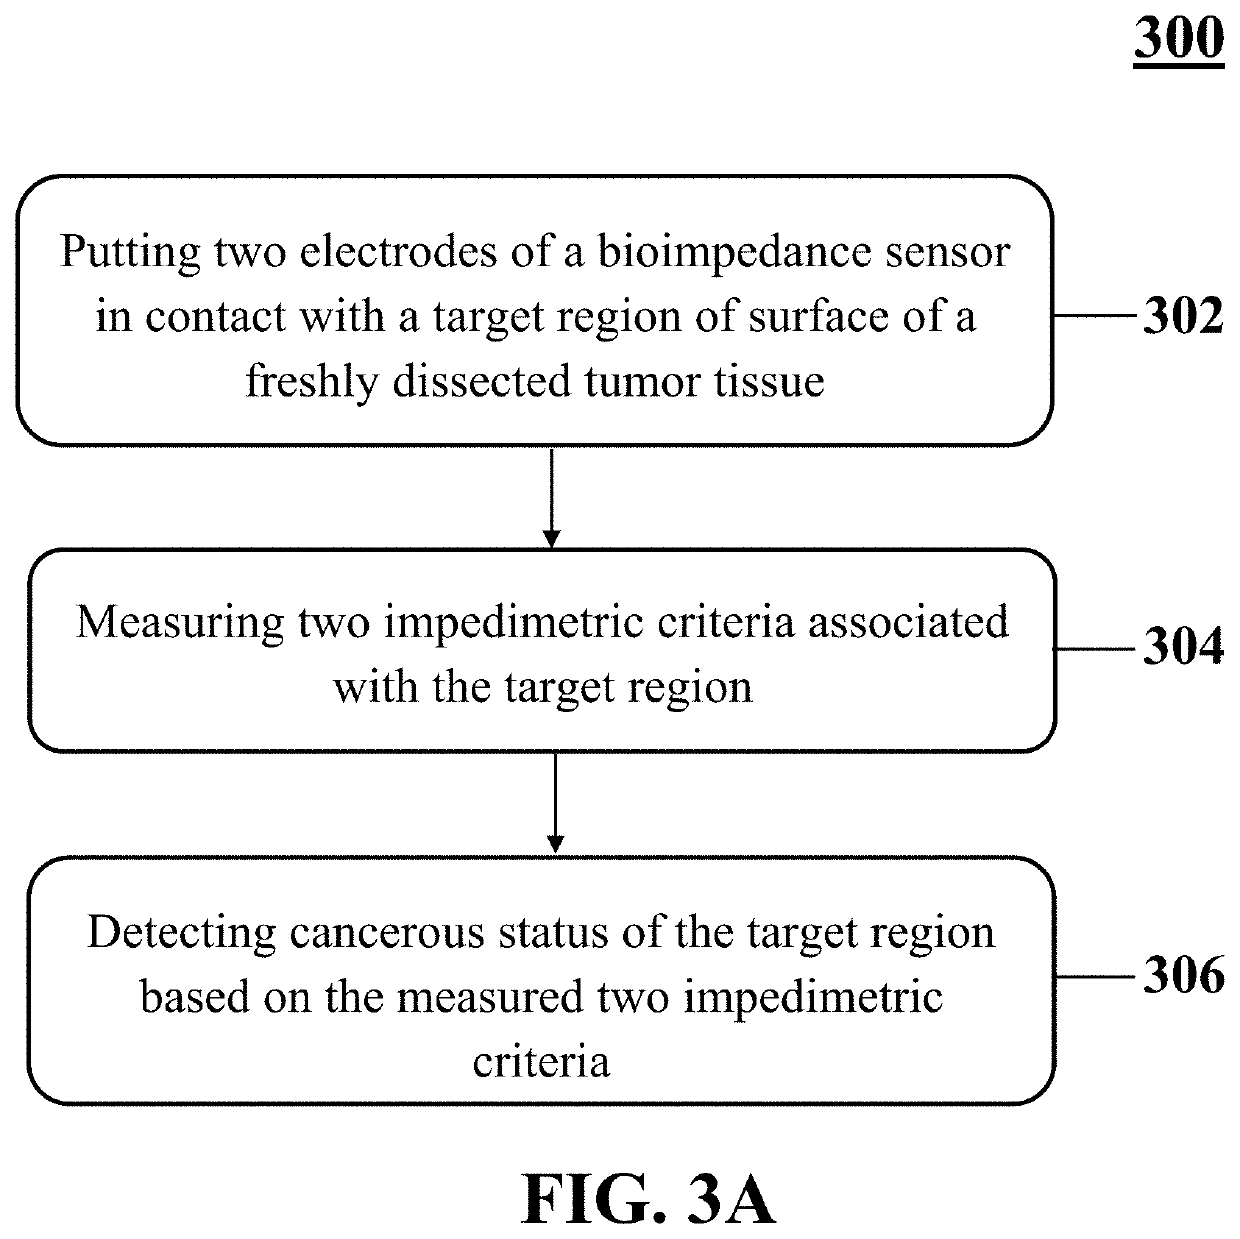 Bioelectrical cancer diagnosis of margins of a freshly dissected cancerous tumor